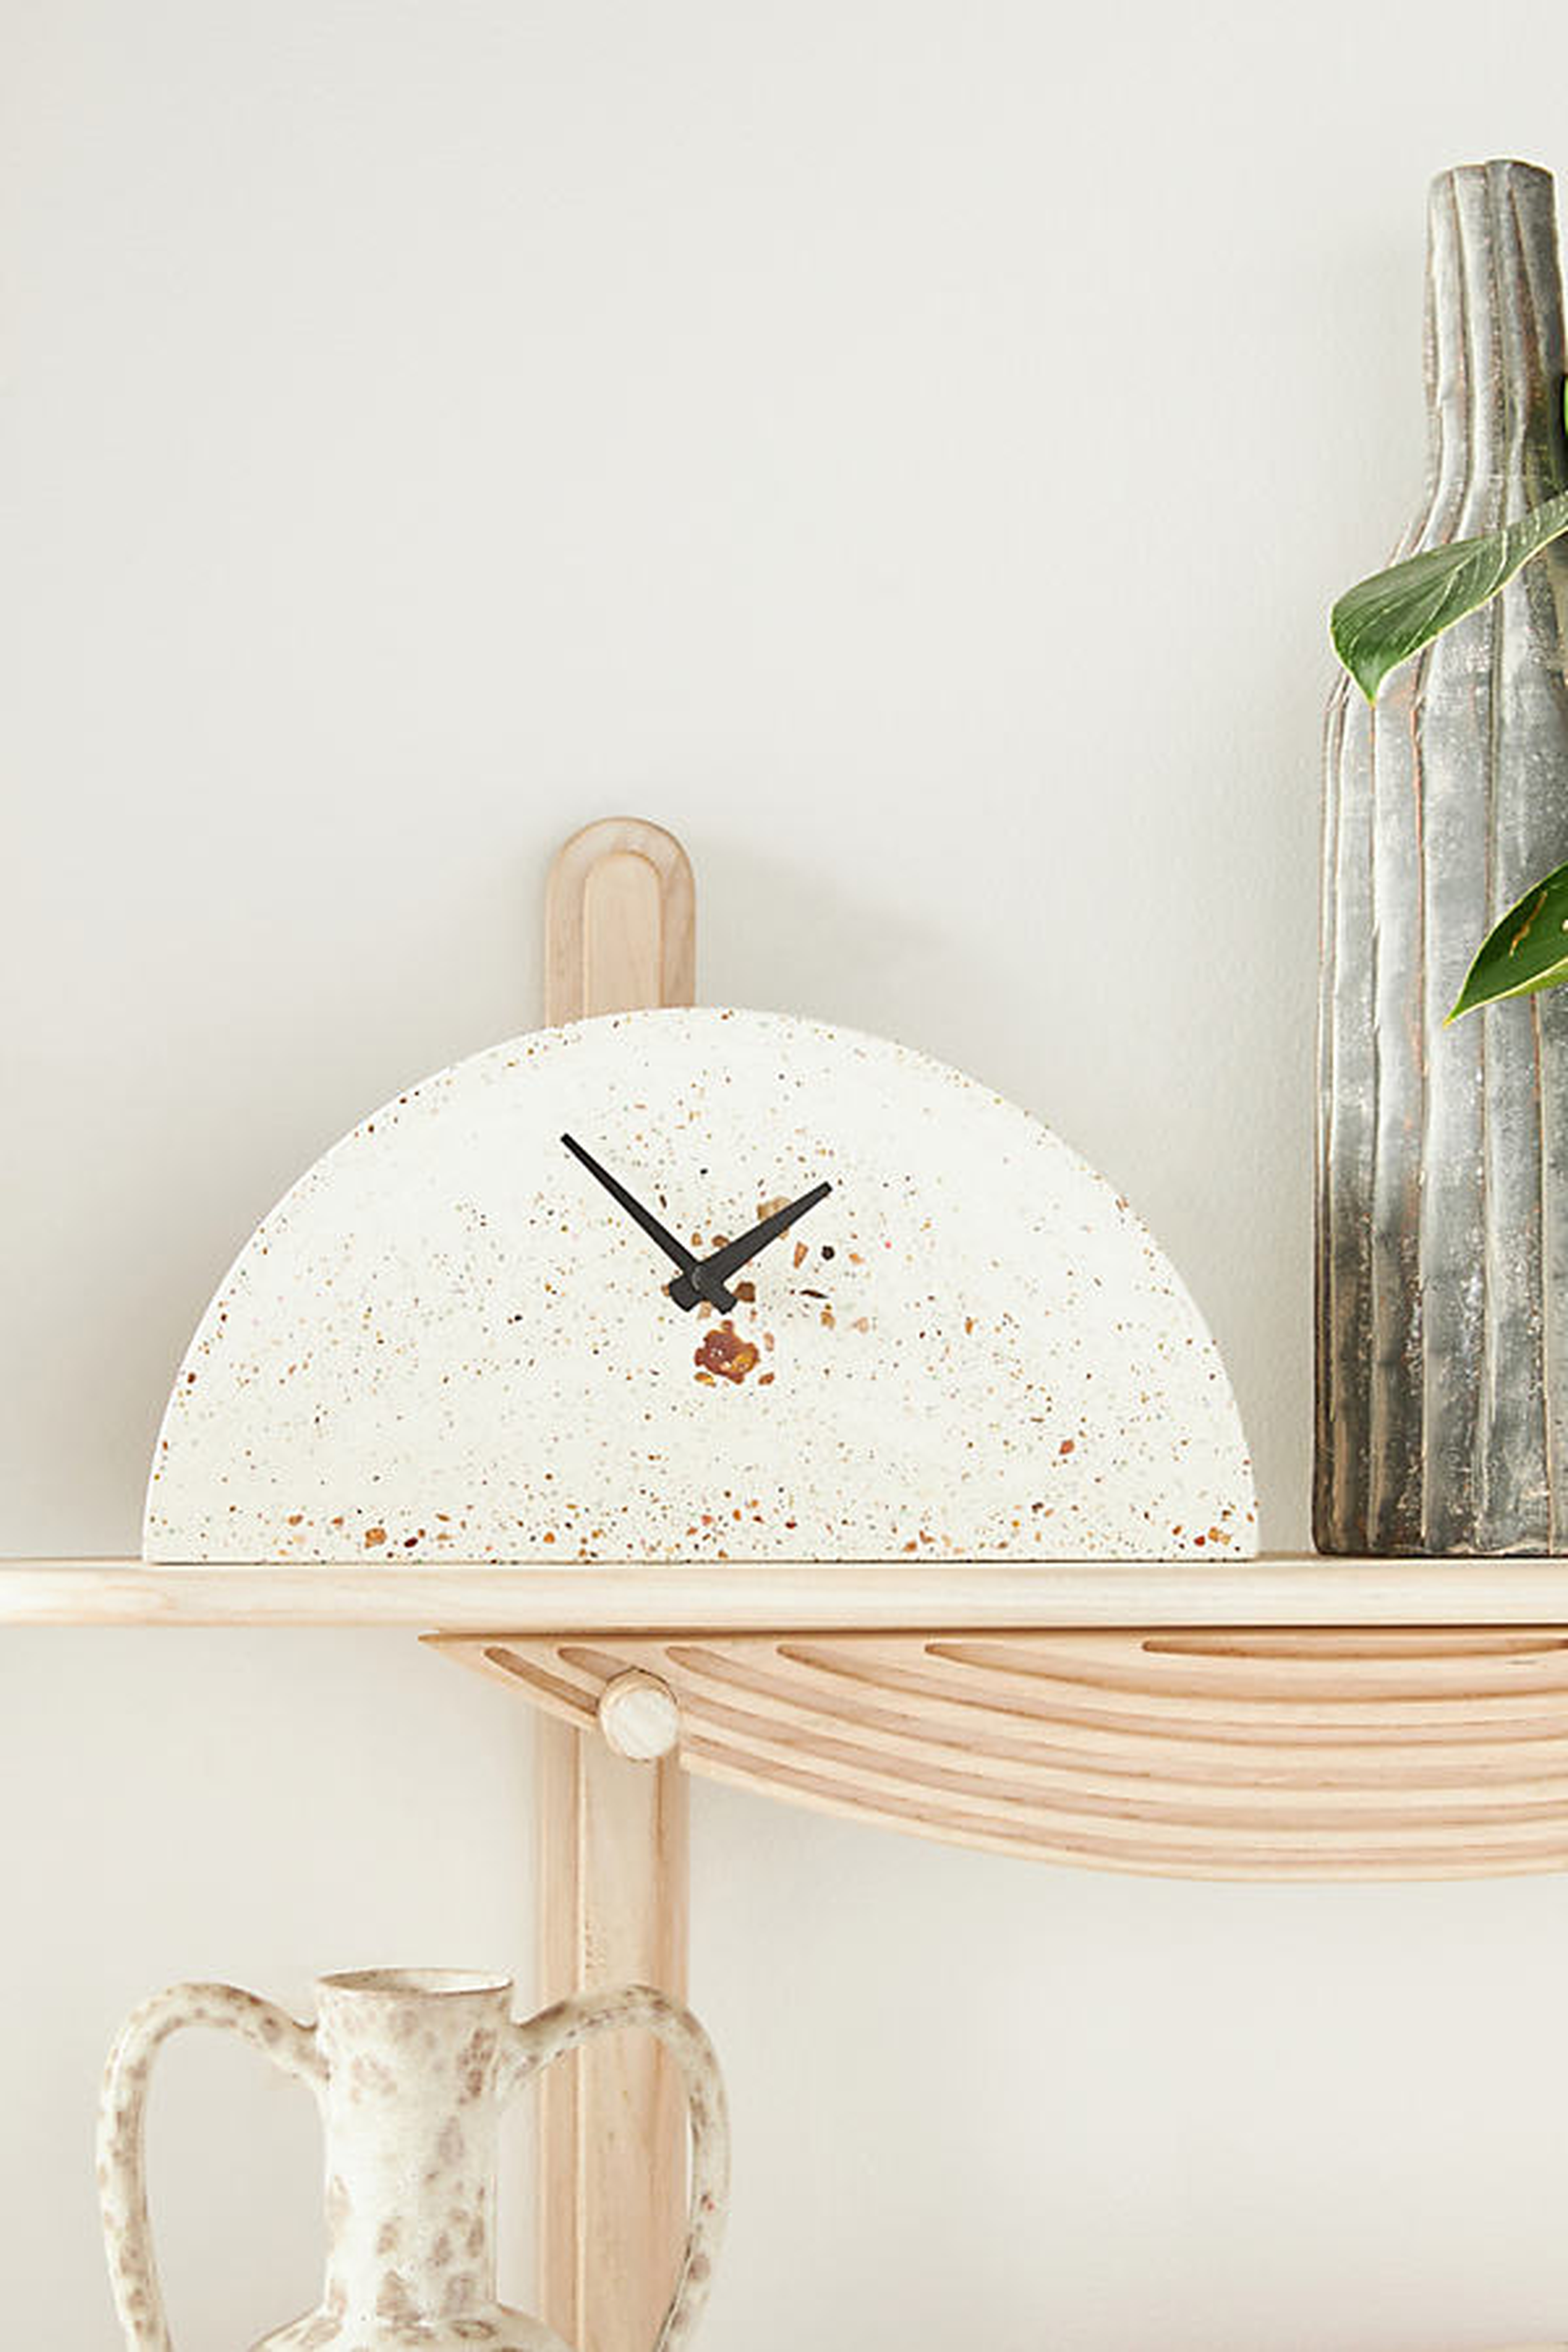 Terrazzo Mantel Clock By Anthropologie in White - Anthropologie